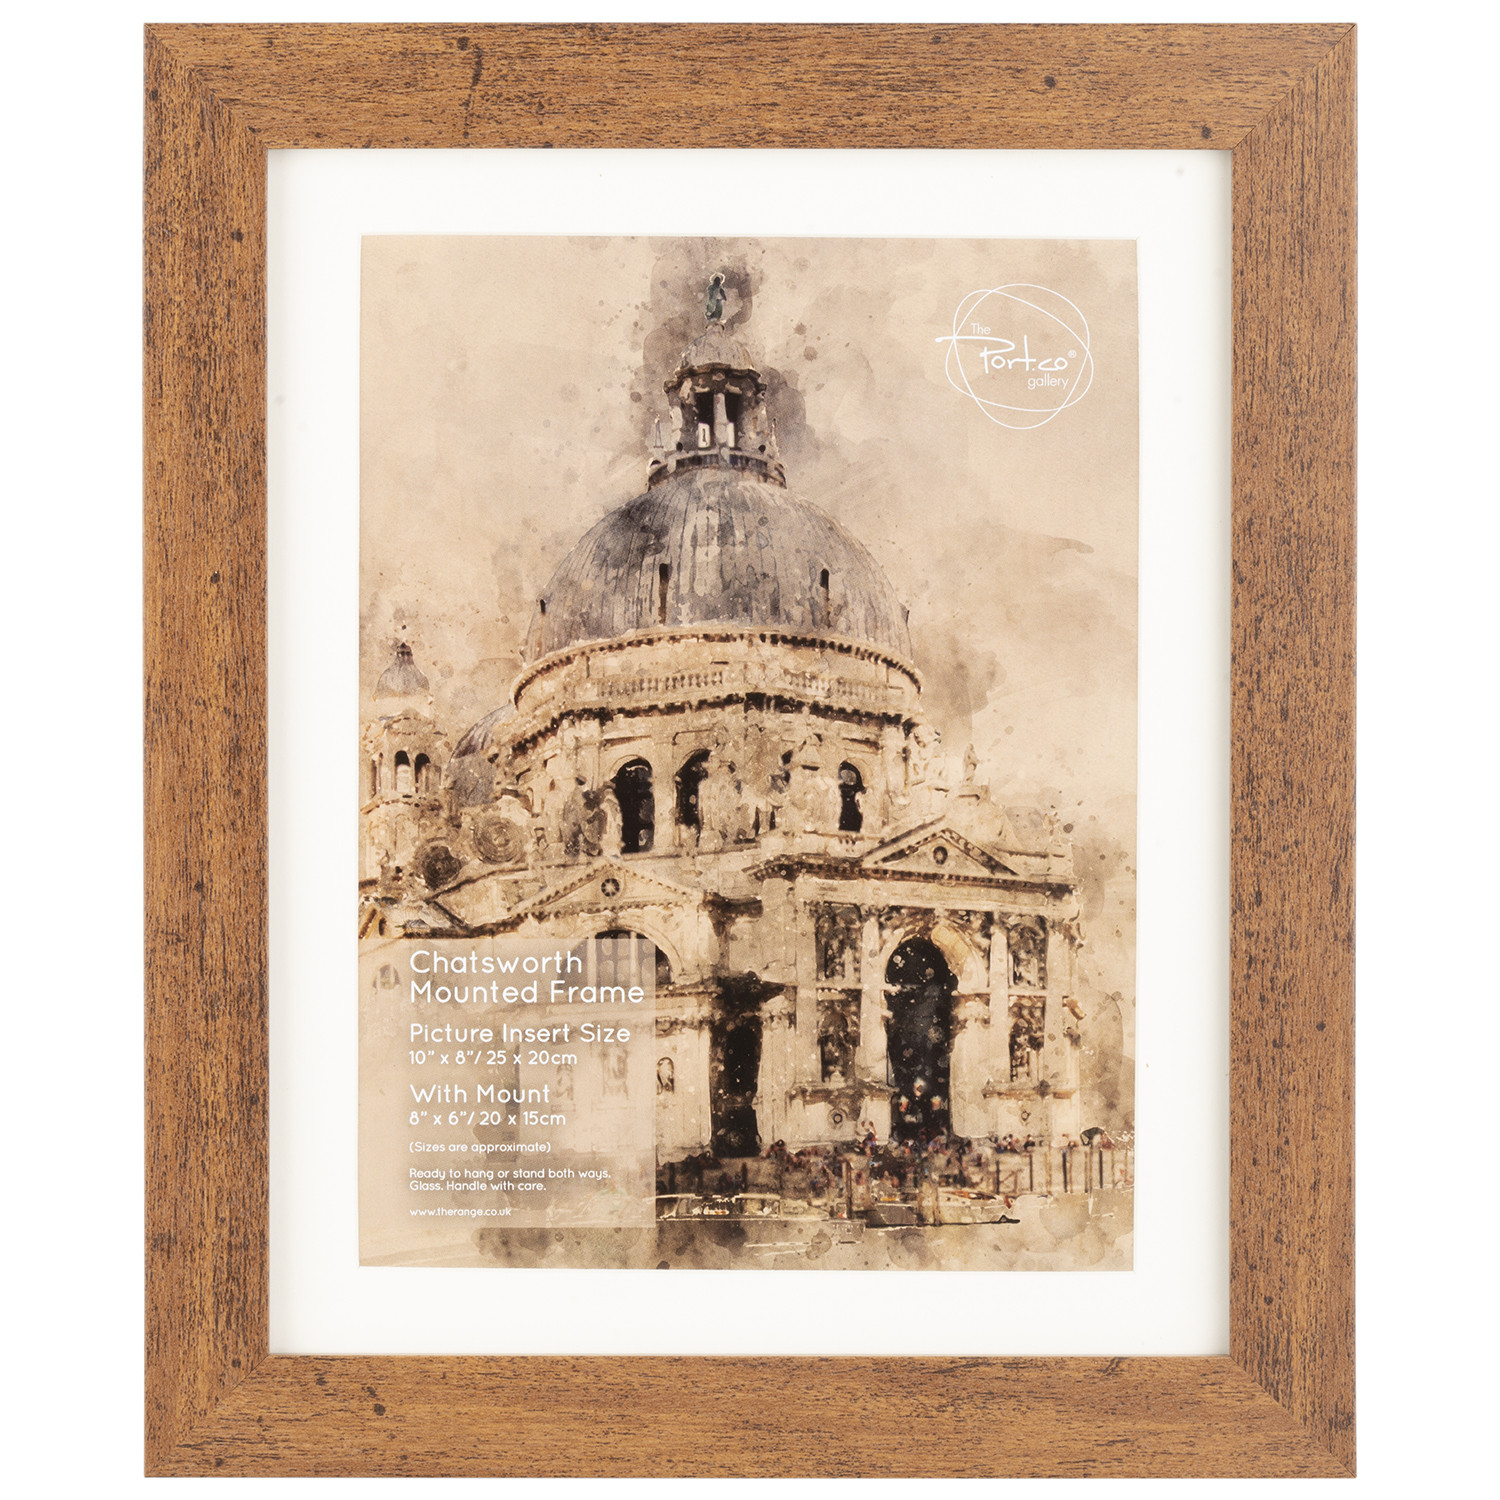 The Port. Co Gallery Chatsworth Mounted Photo Frame 8 x 6 inch Image